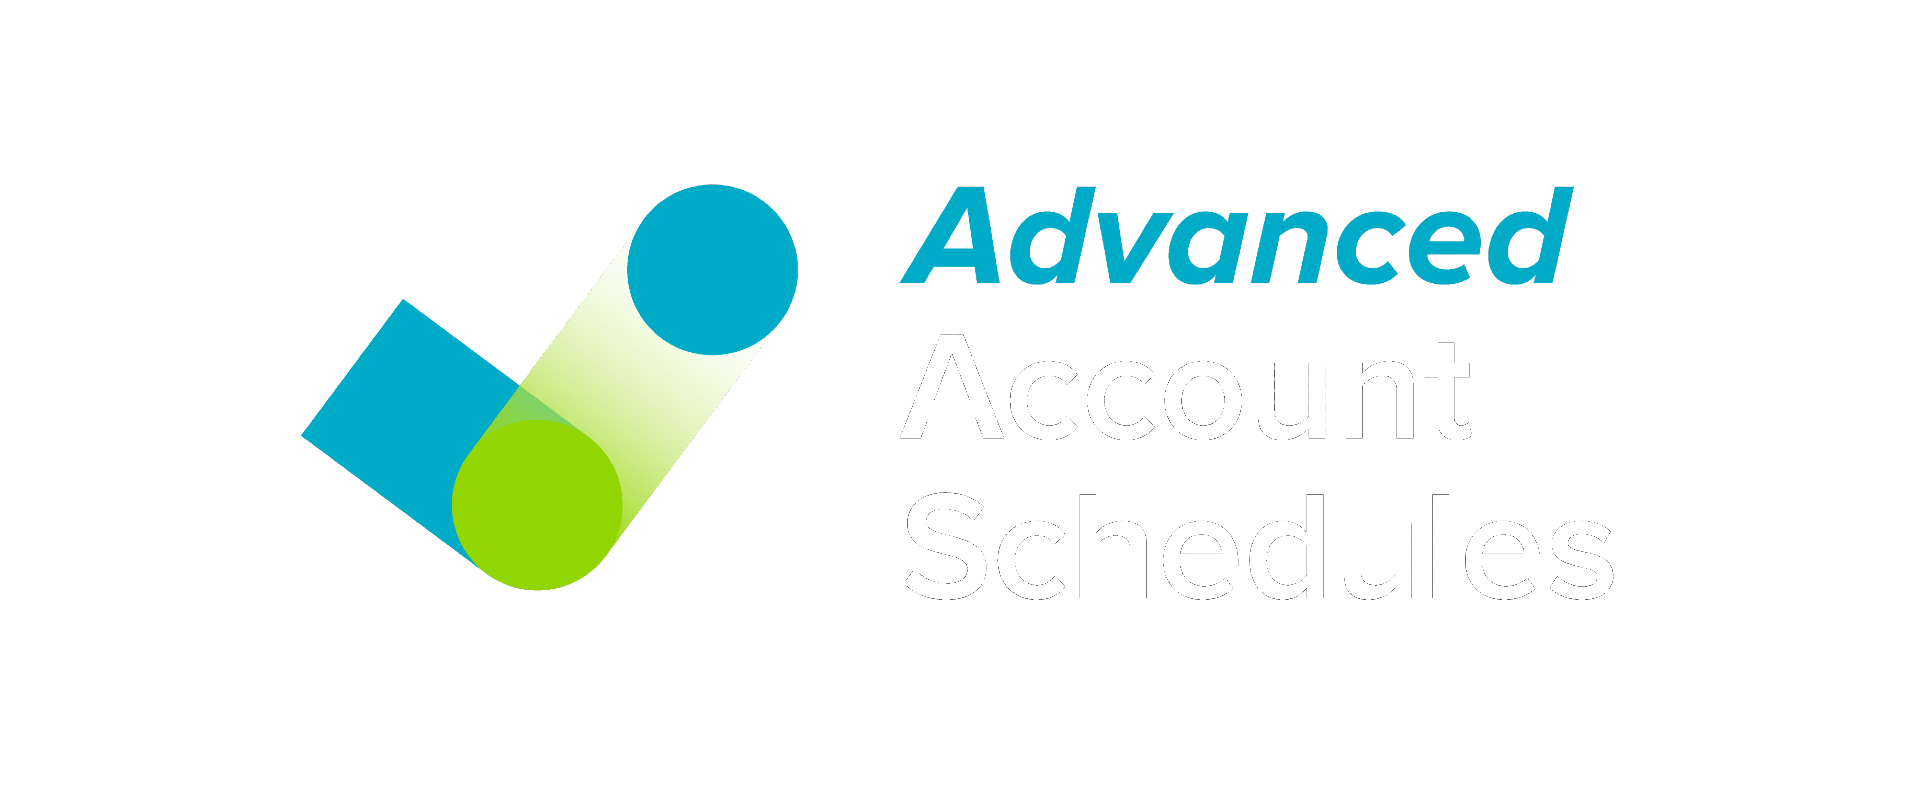 advanced account schedules app by EFOQUS